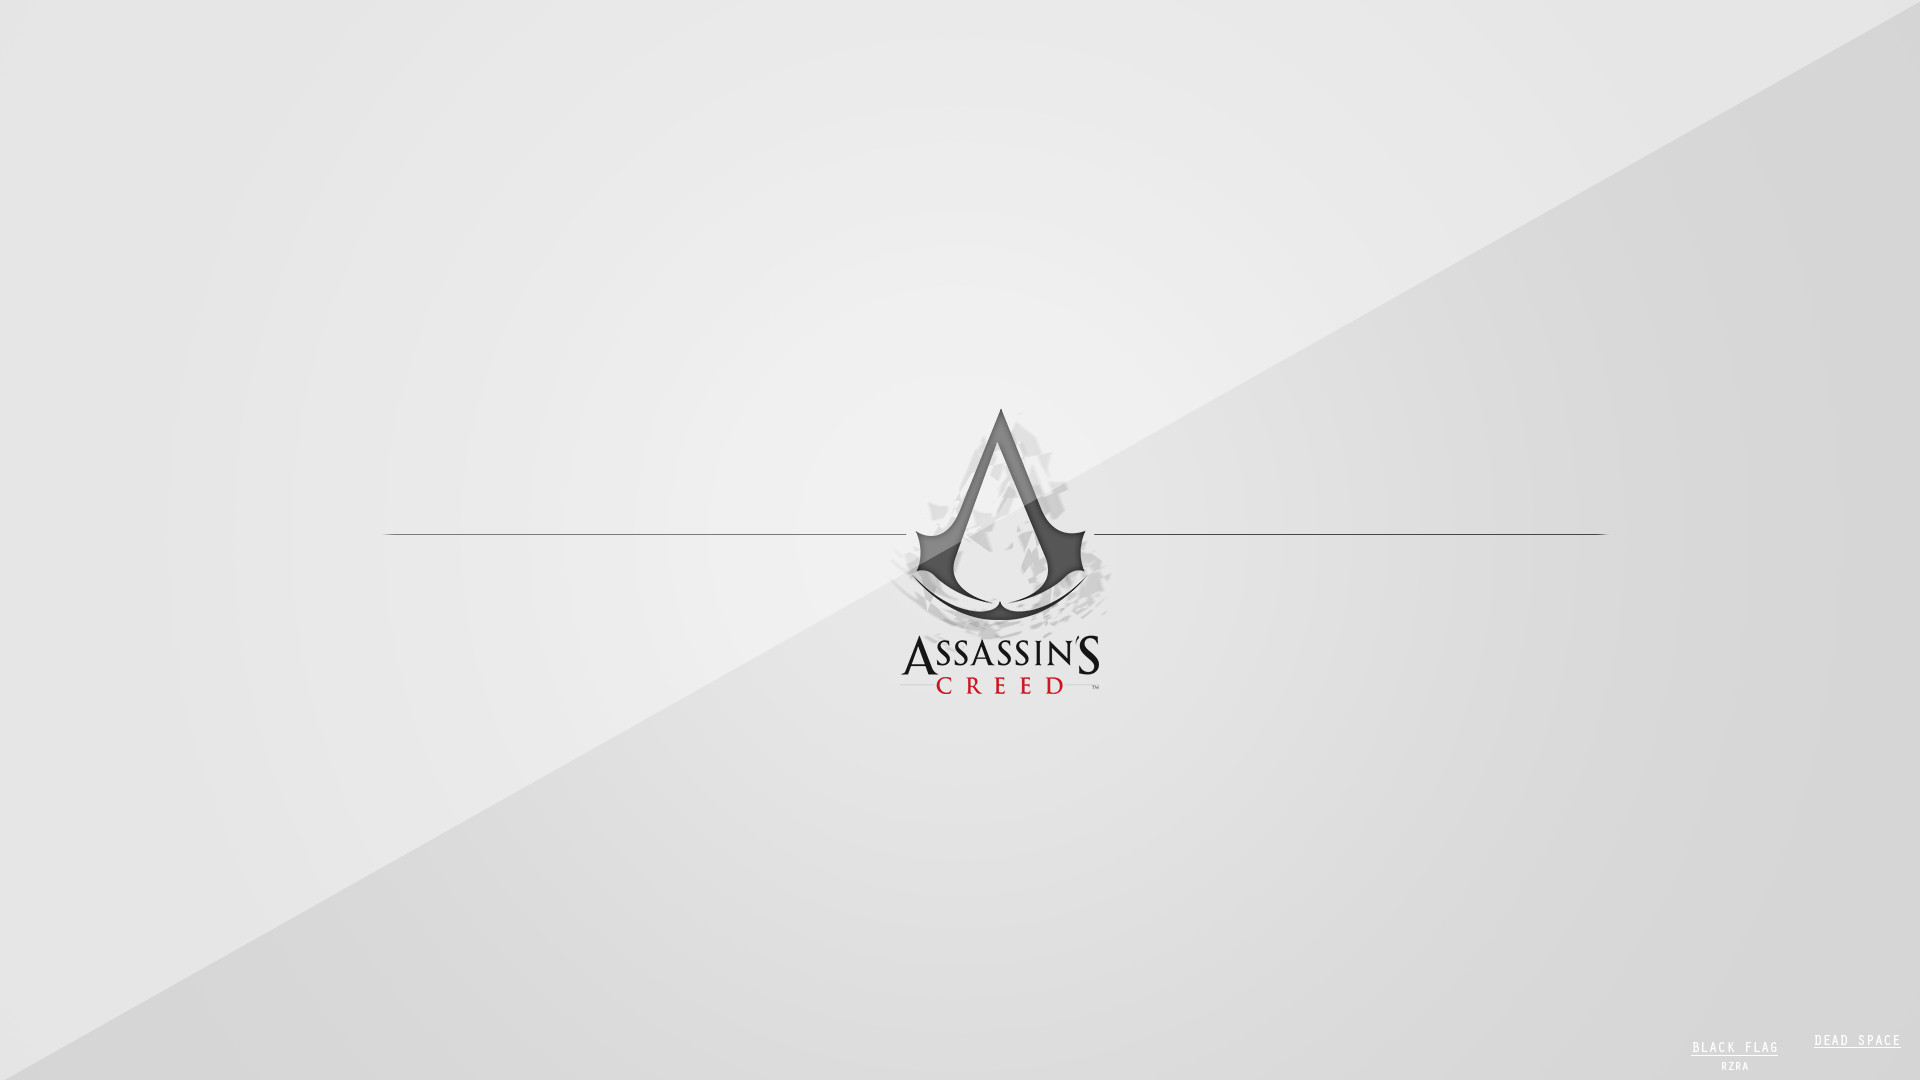 1920x1080 ... Assassin's Creed Black Flag Wallpaper by Rzra